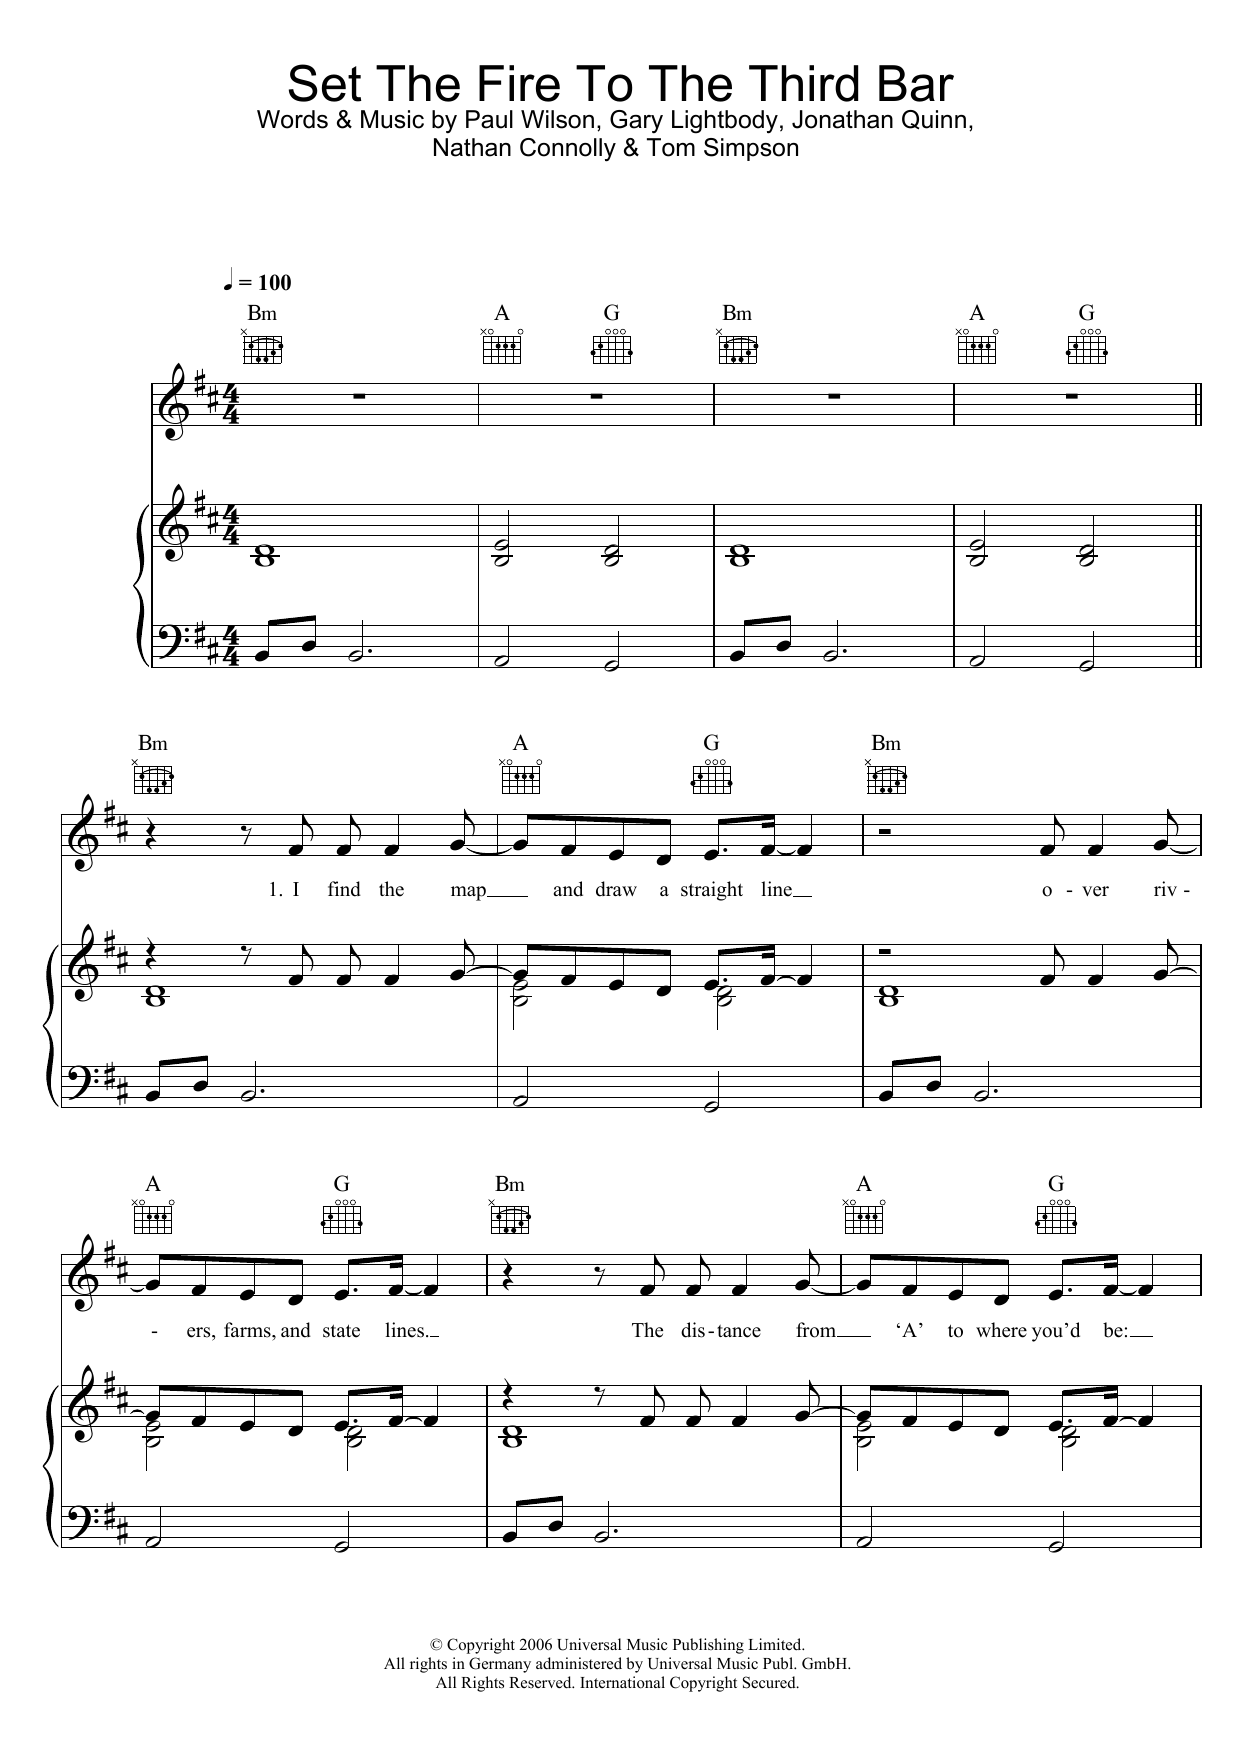 Download Snow Patrol Set The Fire To The Third Bar Sheet Music